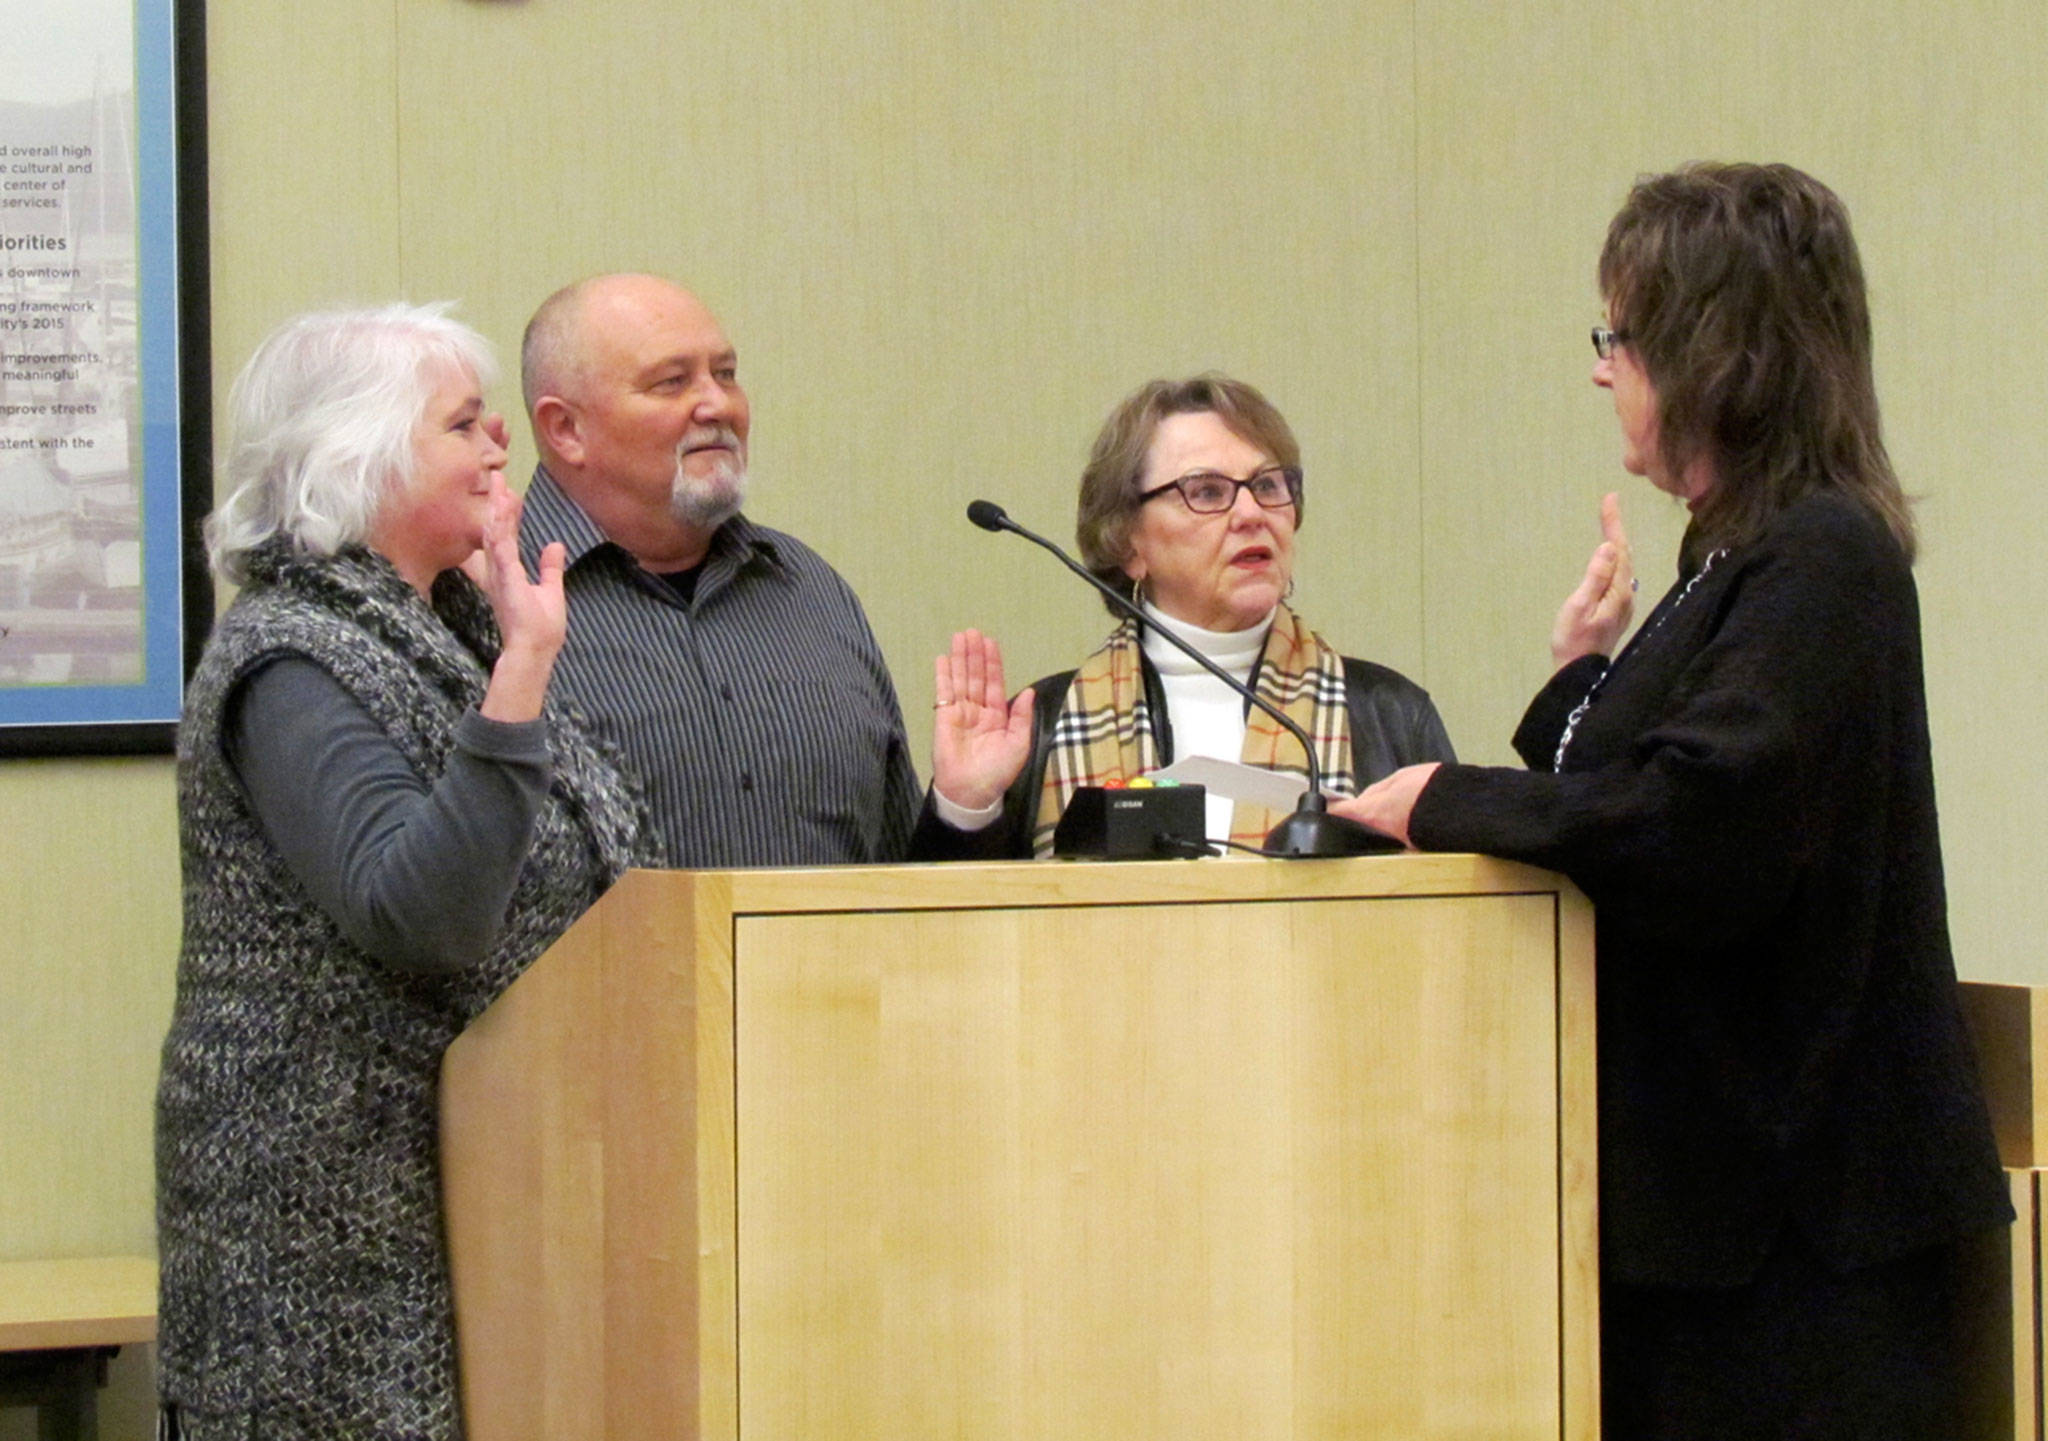 Sequim City Council members, from left, Pam Leonard- Ray, John Miller, and Candace Pratt take the oath of office in Jan. 2016 from Sequim City Clerk Karen Kuznek-Reese. Miller died Wednesday, and Leonard-Ray said “they will have a difficult time filling his shoes with someone with the same connections.” Photo courtesy City of Sequim